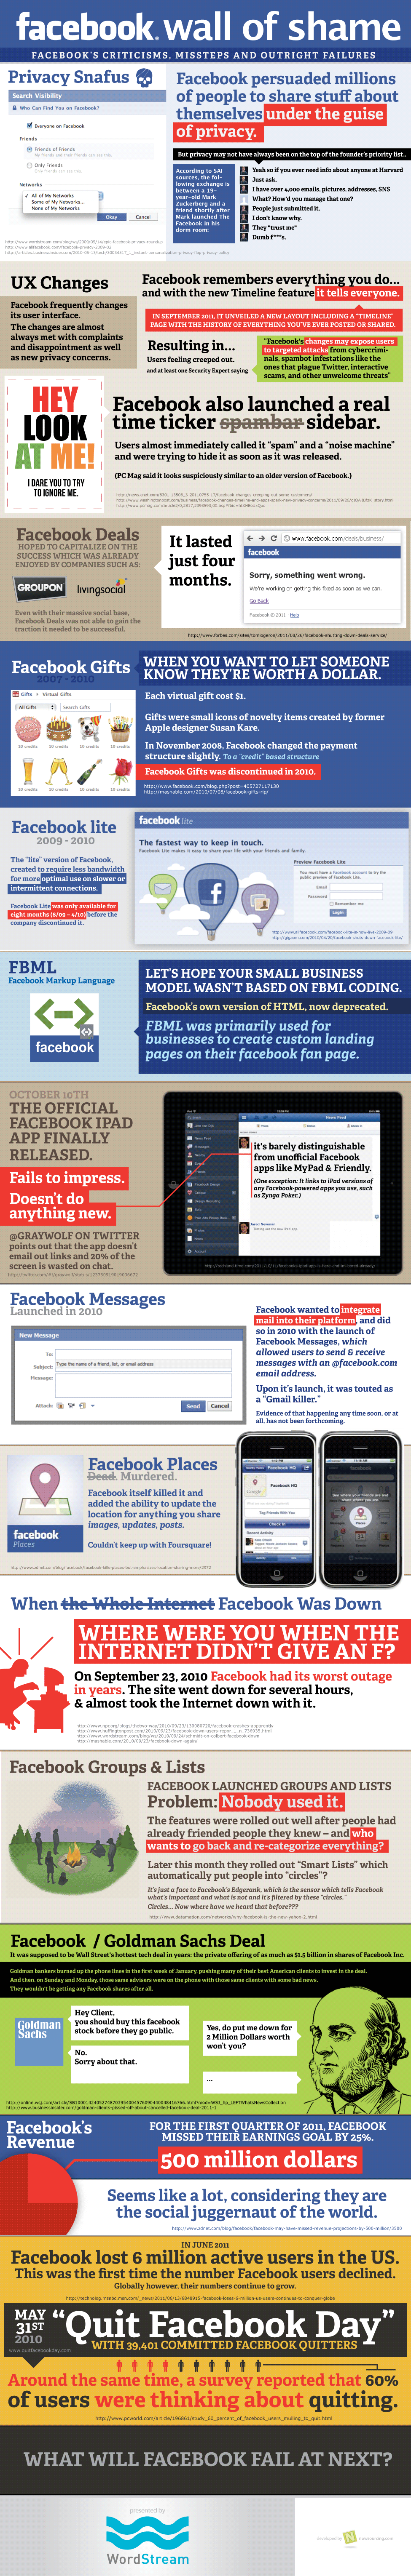 Facebook Wall Of Shame Infographic